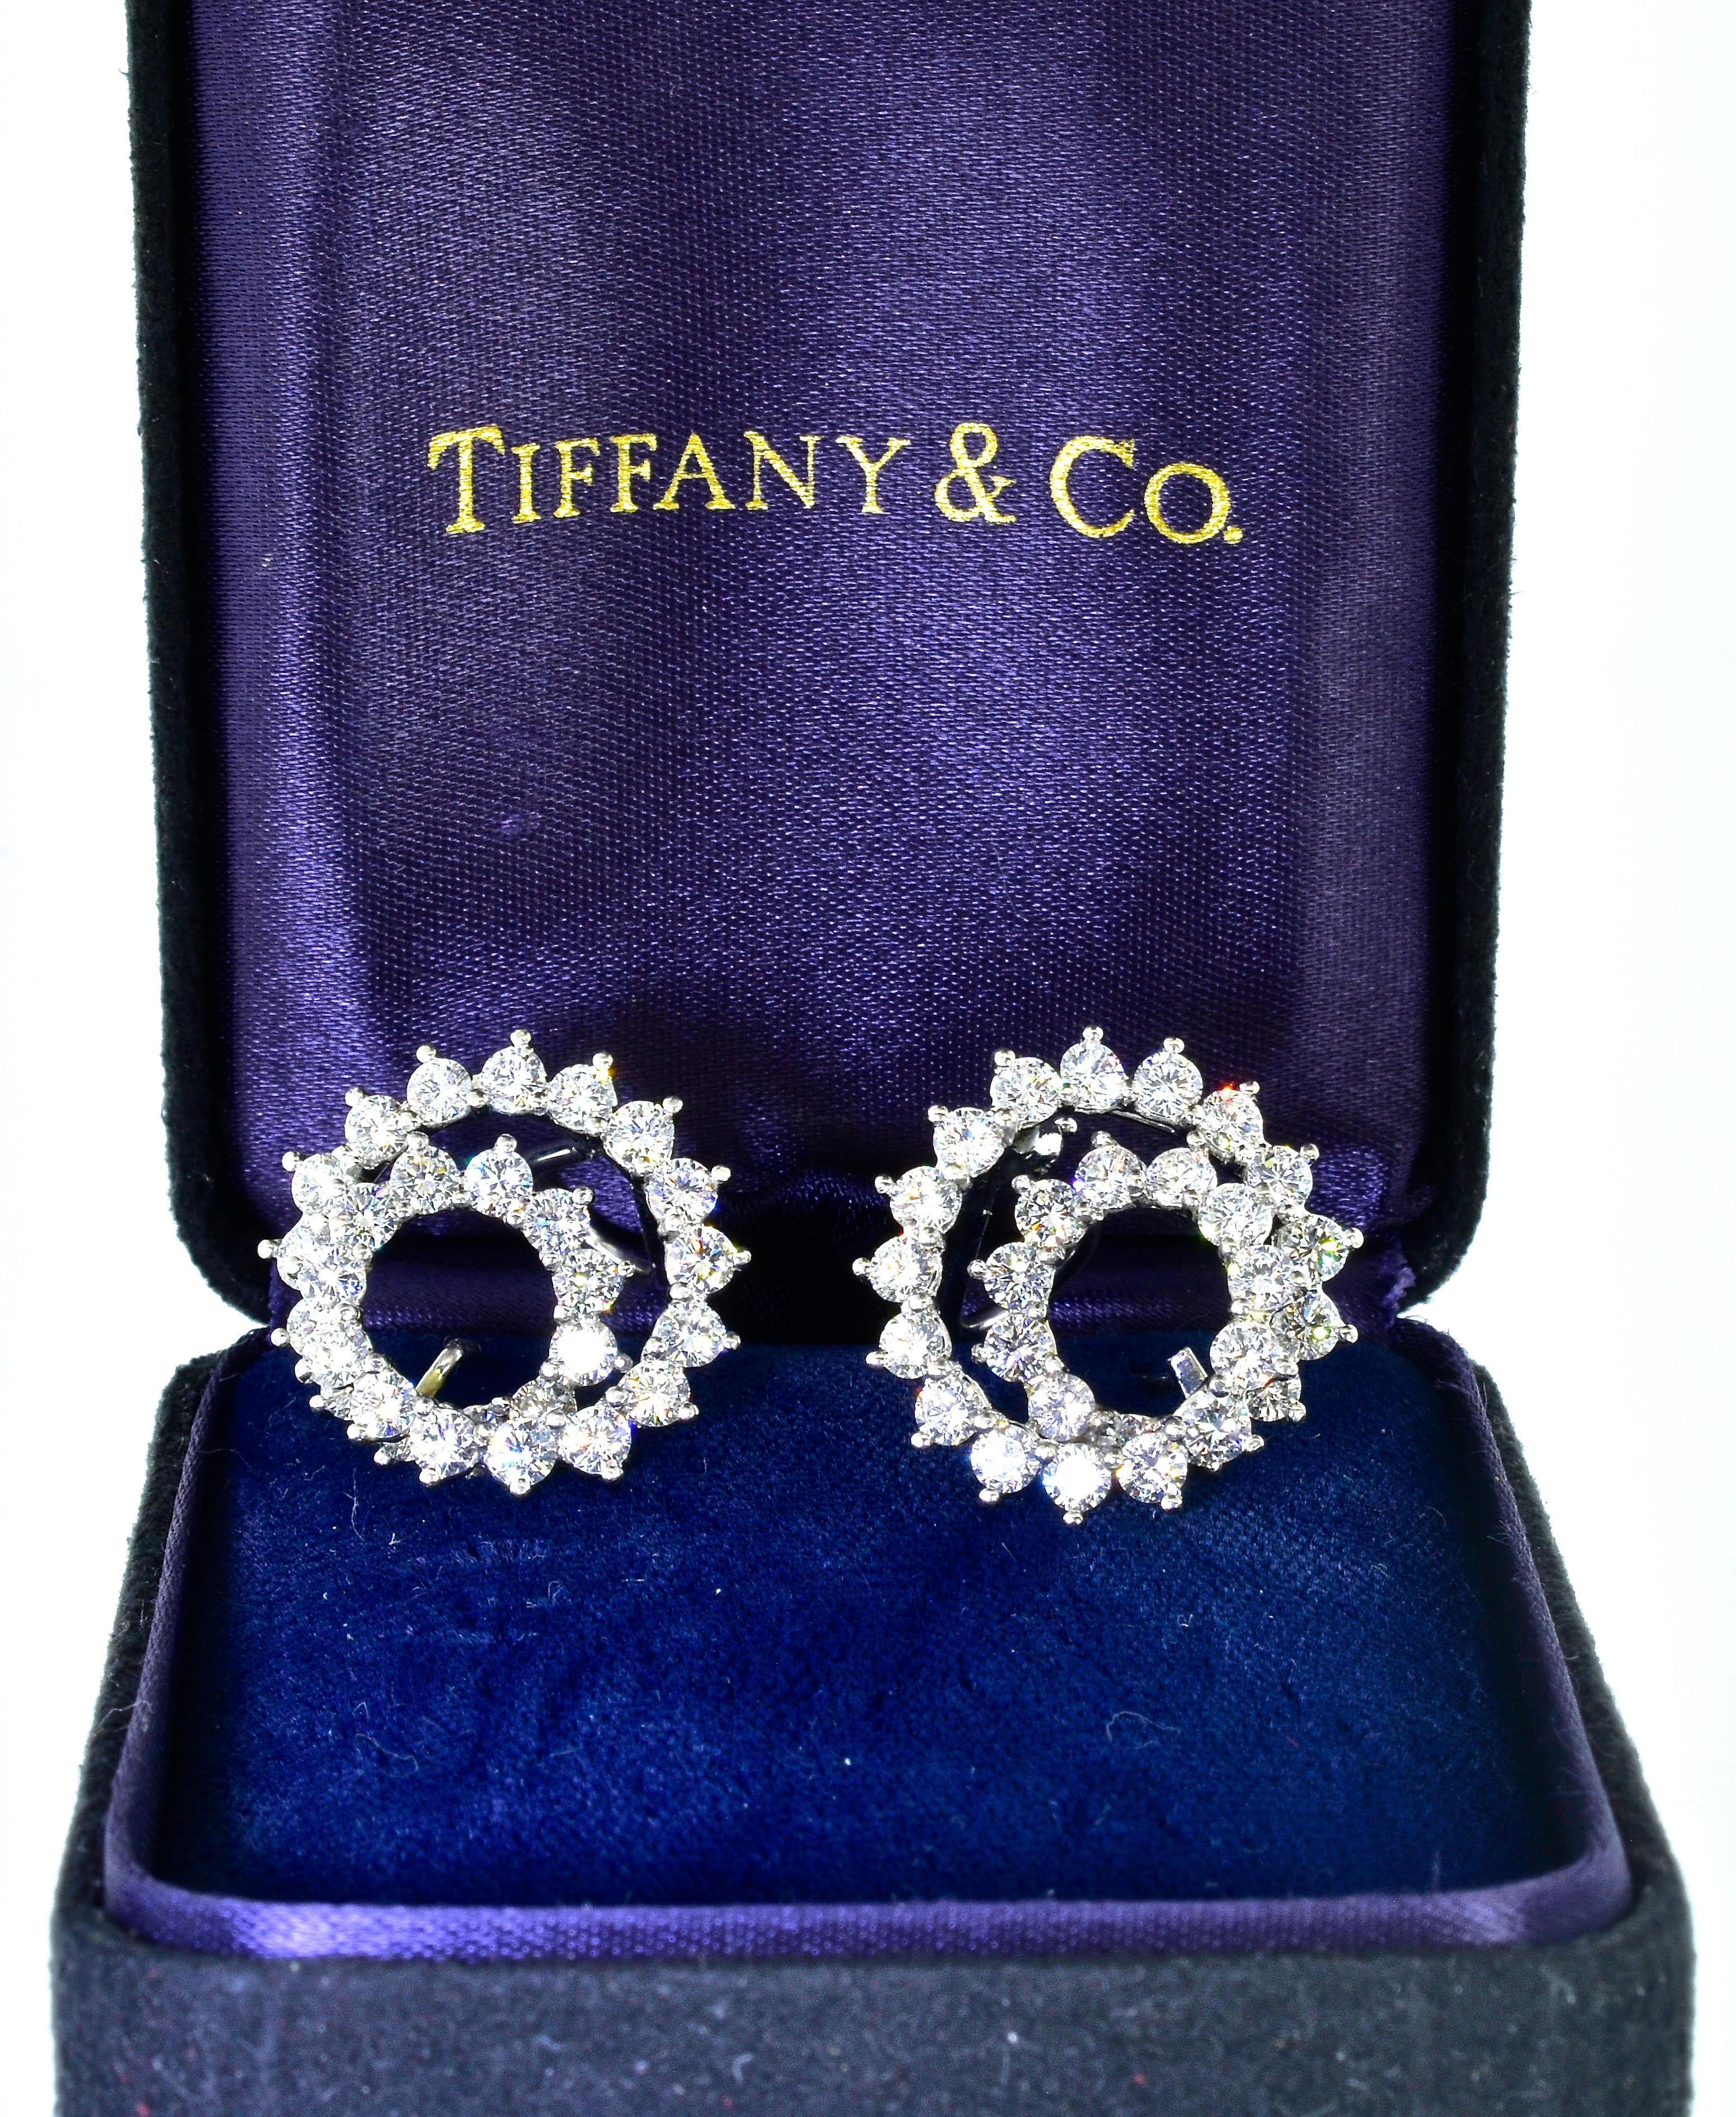 Tiffany & Co. diamond earrings in a swirl motif with fine white diamonds. The diamonds are colorless to near colorless, F/G and very to very very slightly included, VVS to VS.  The estimated diamond weight is 4.50 cts.  These earrings are platinum